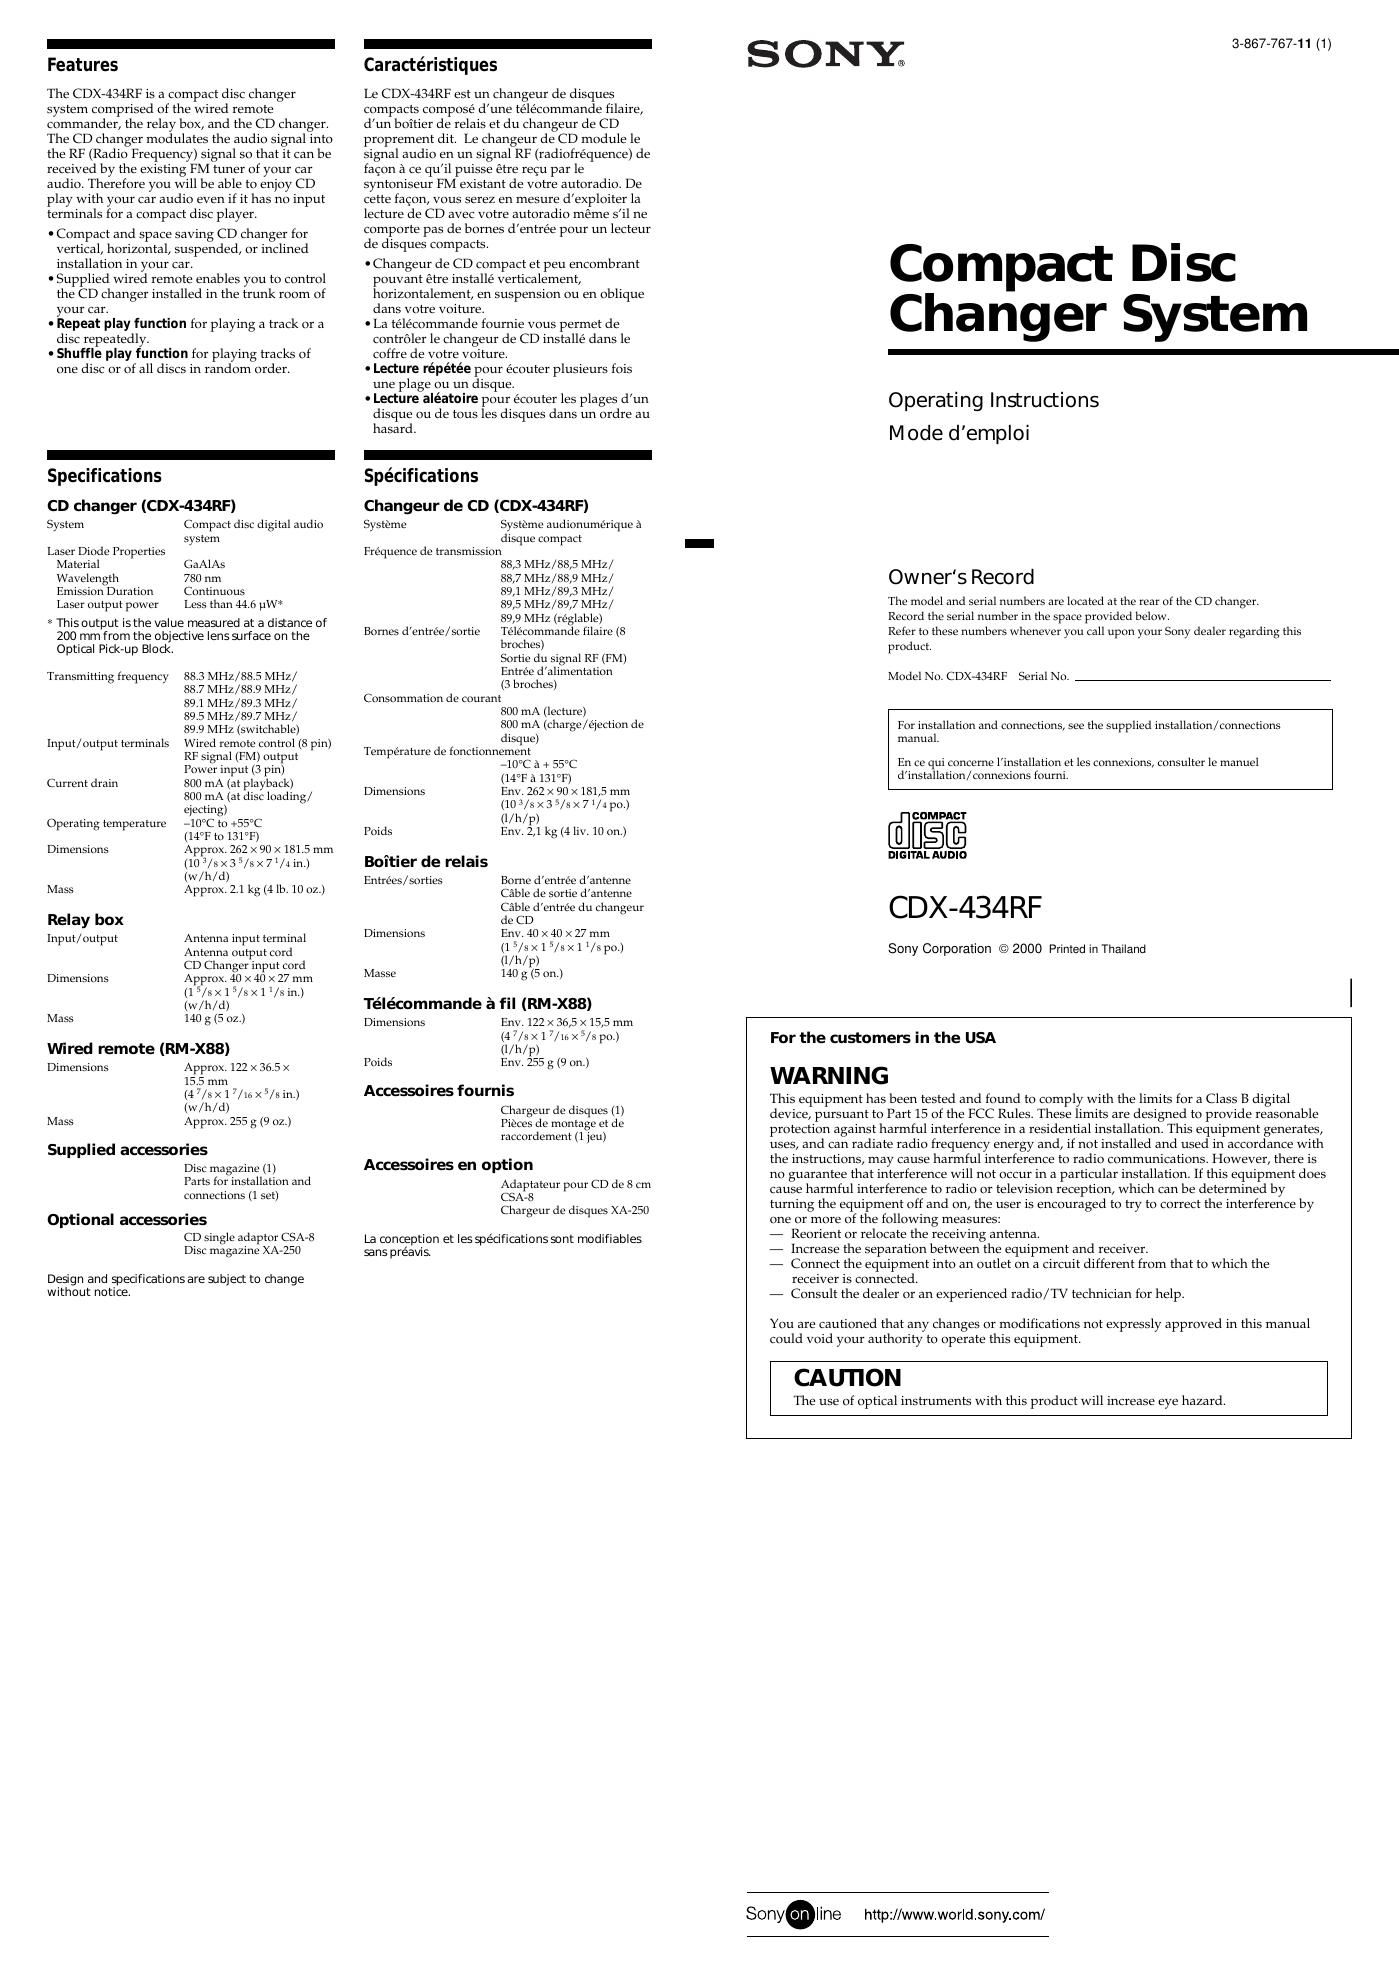 sony cdx 434 rf owners manual